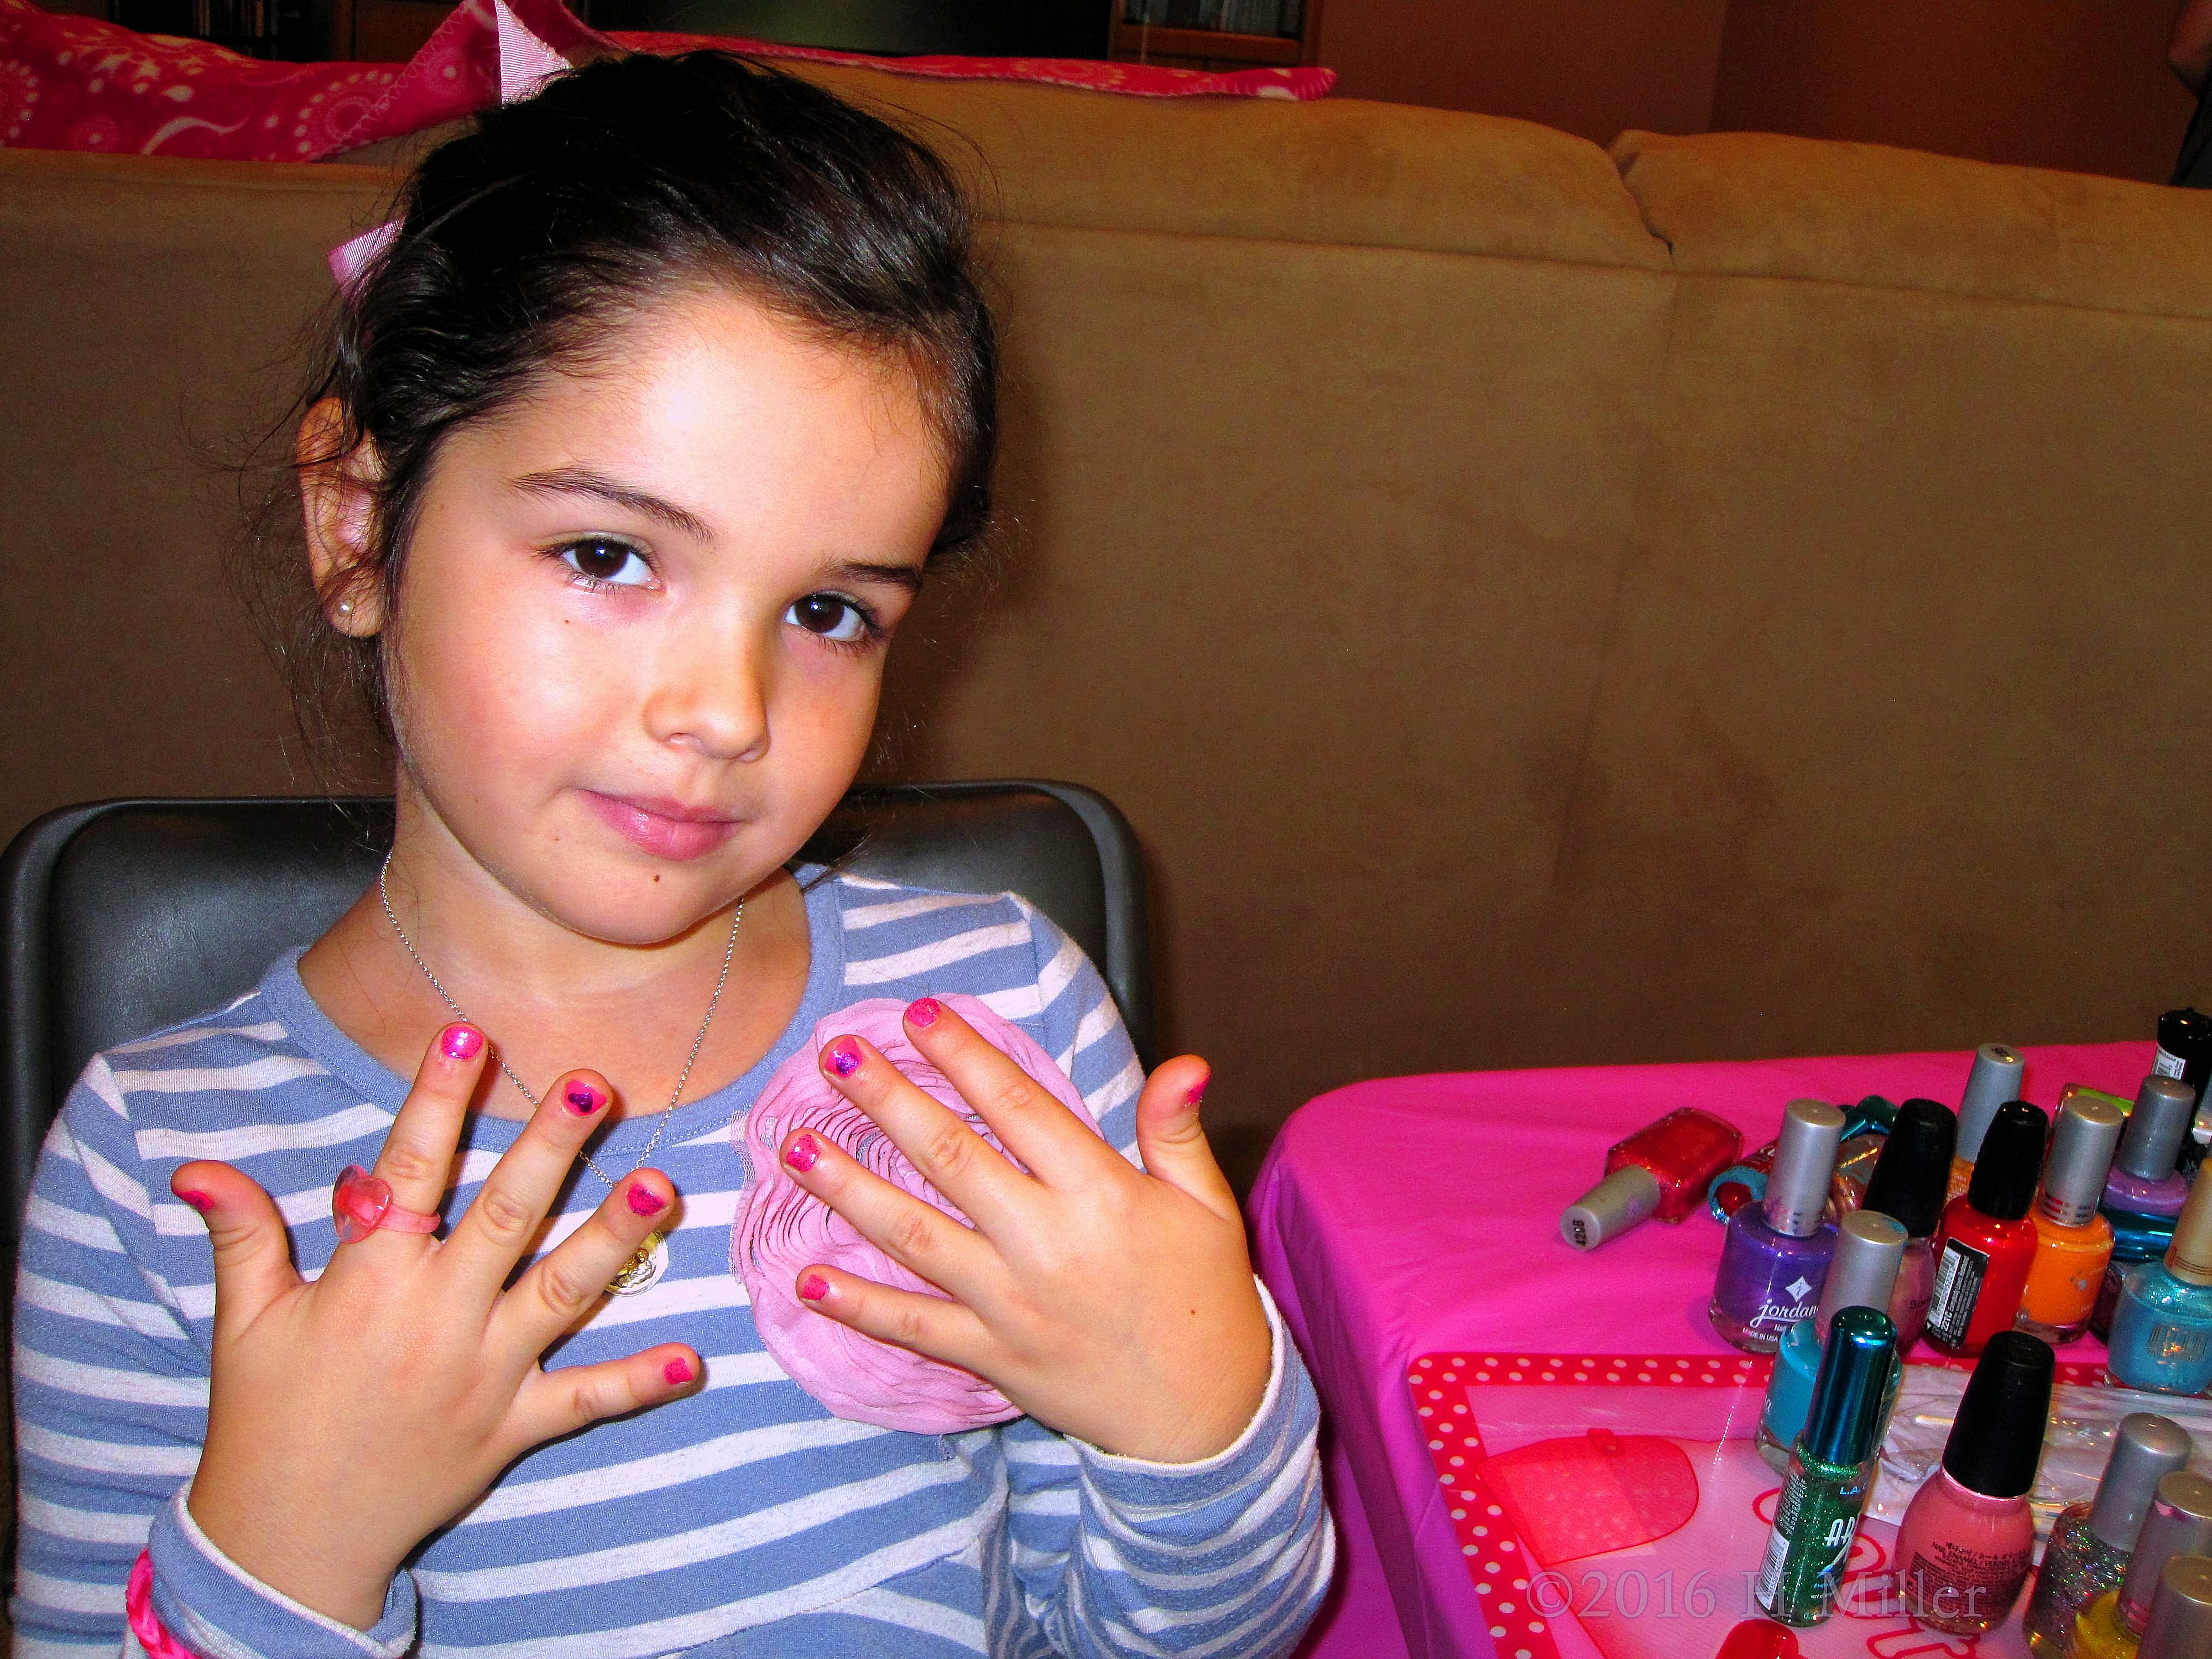 Spa Guest Sure Loves Her Girls Manicure!